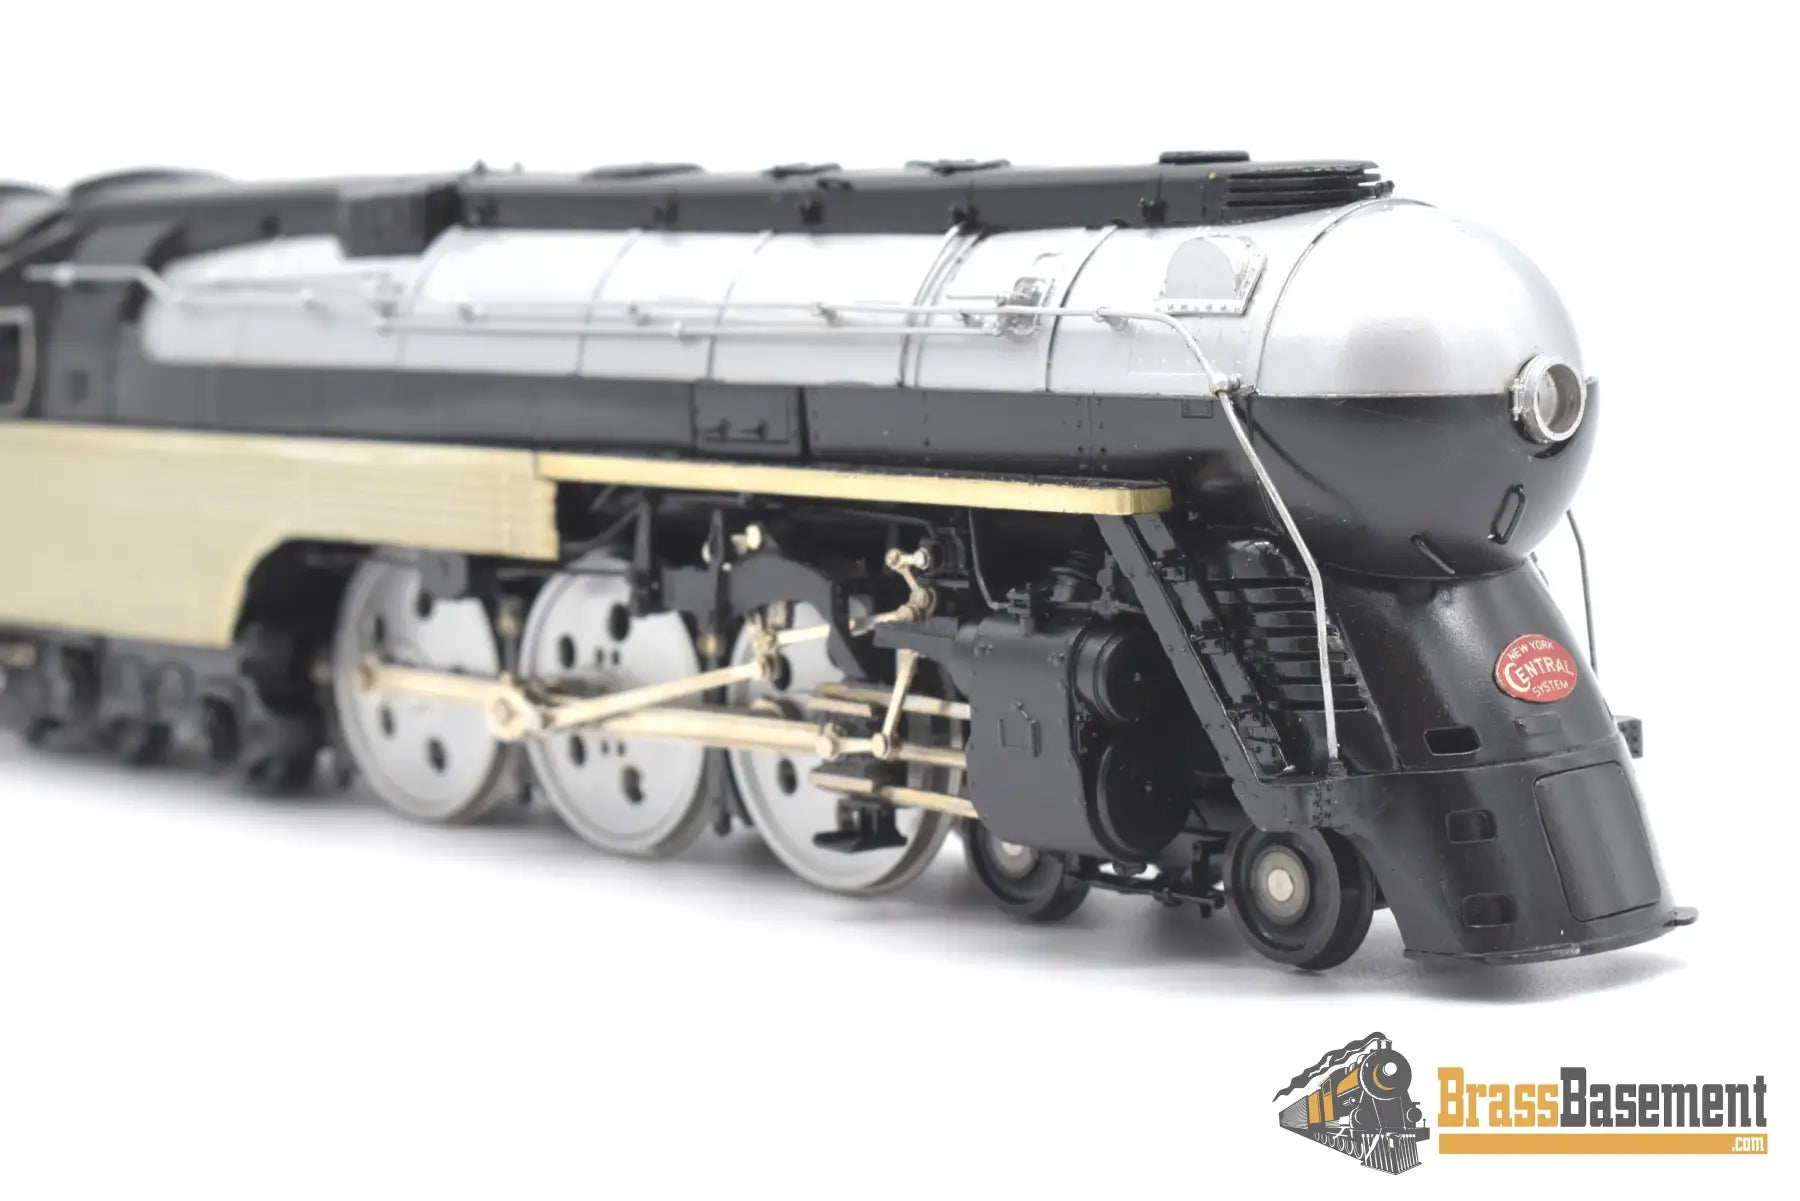 Ho Brass - Psc 15332 Nyc New York Central Empire State Express 4 - 6 - 4 Locomotive And Six Cars